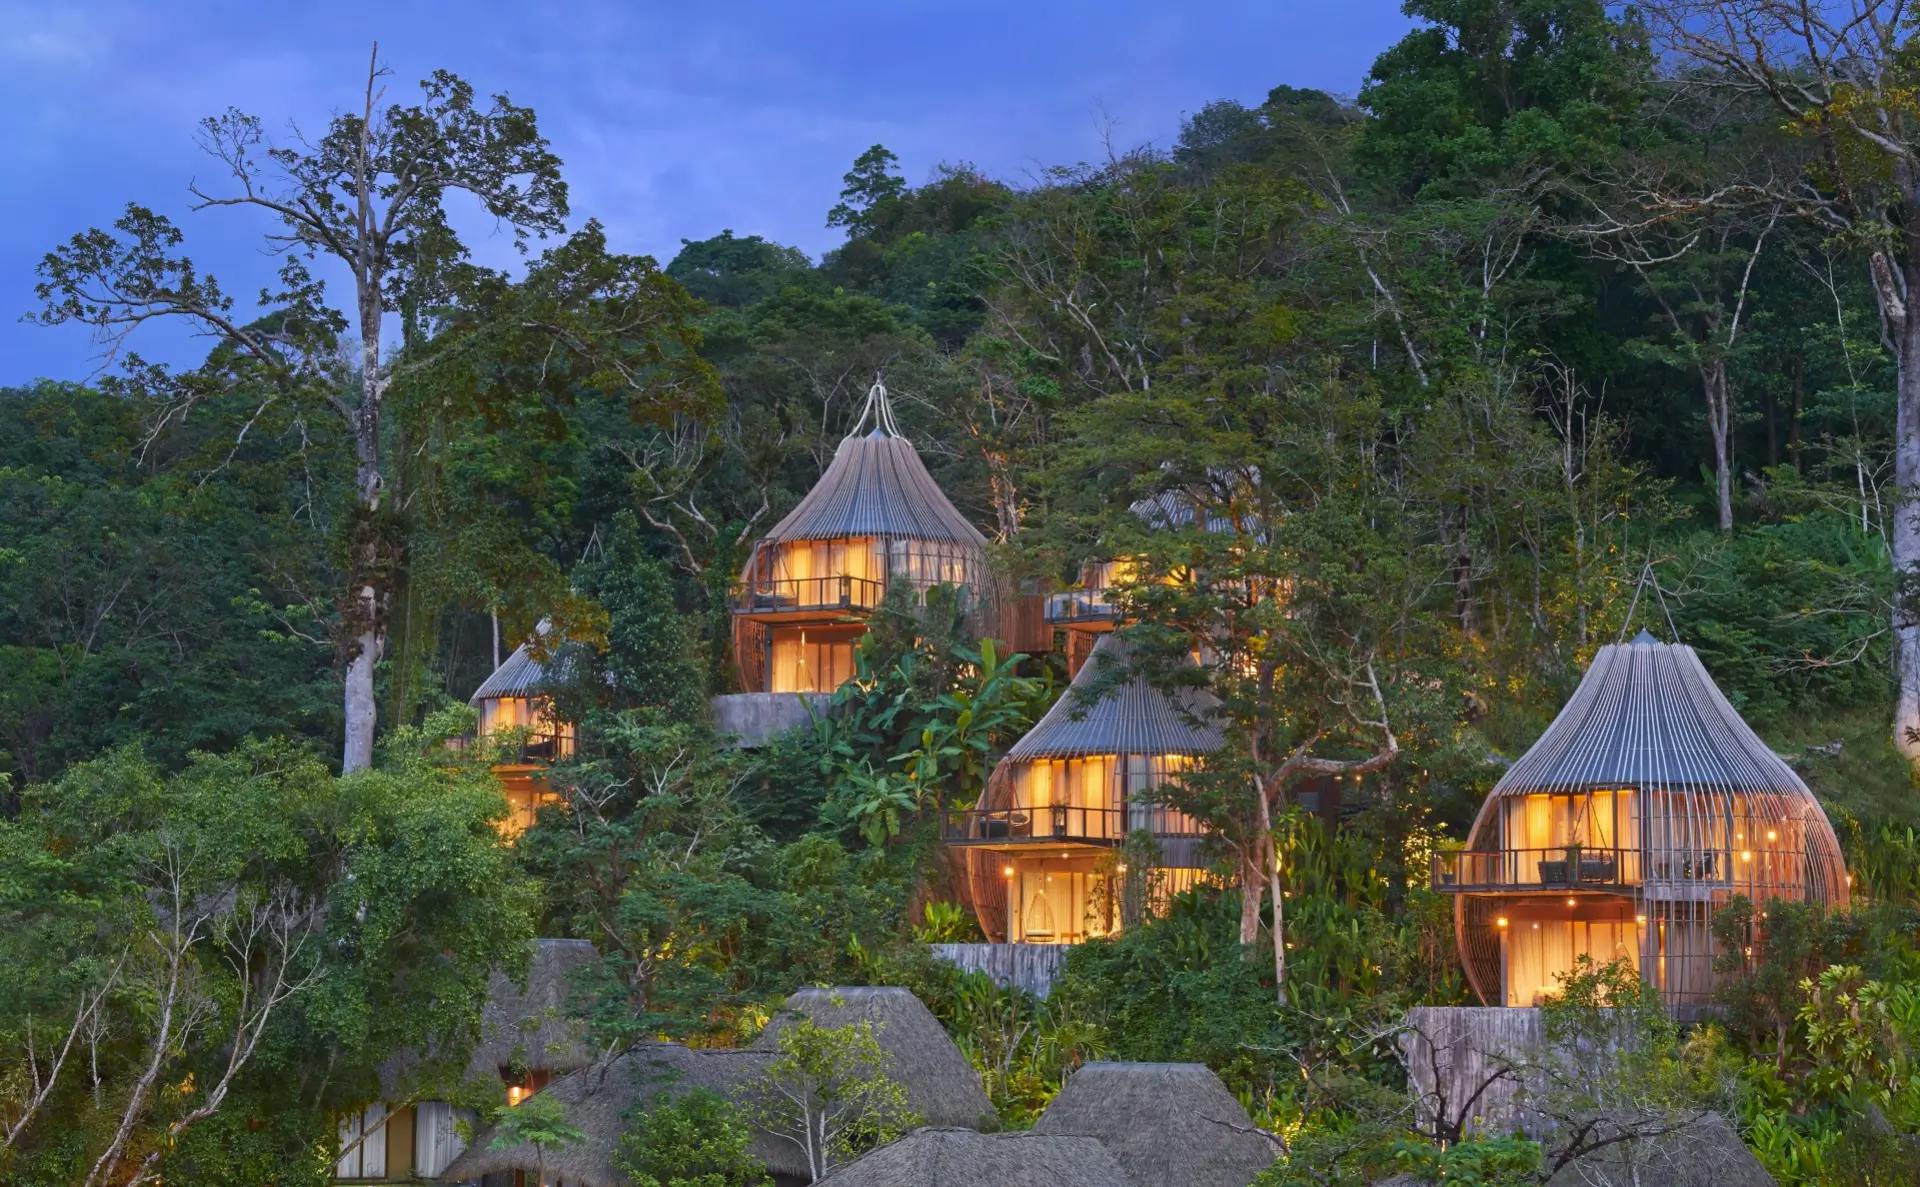 This beautifully designed chalets that are elevated within the treetops and surrounded by lush foliage offer a unique and enchanting experience. These accommodations often provide stunning views of the surrounding nature, a sense of privacy, and a feeling of being one with the environment.